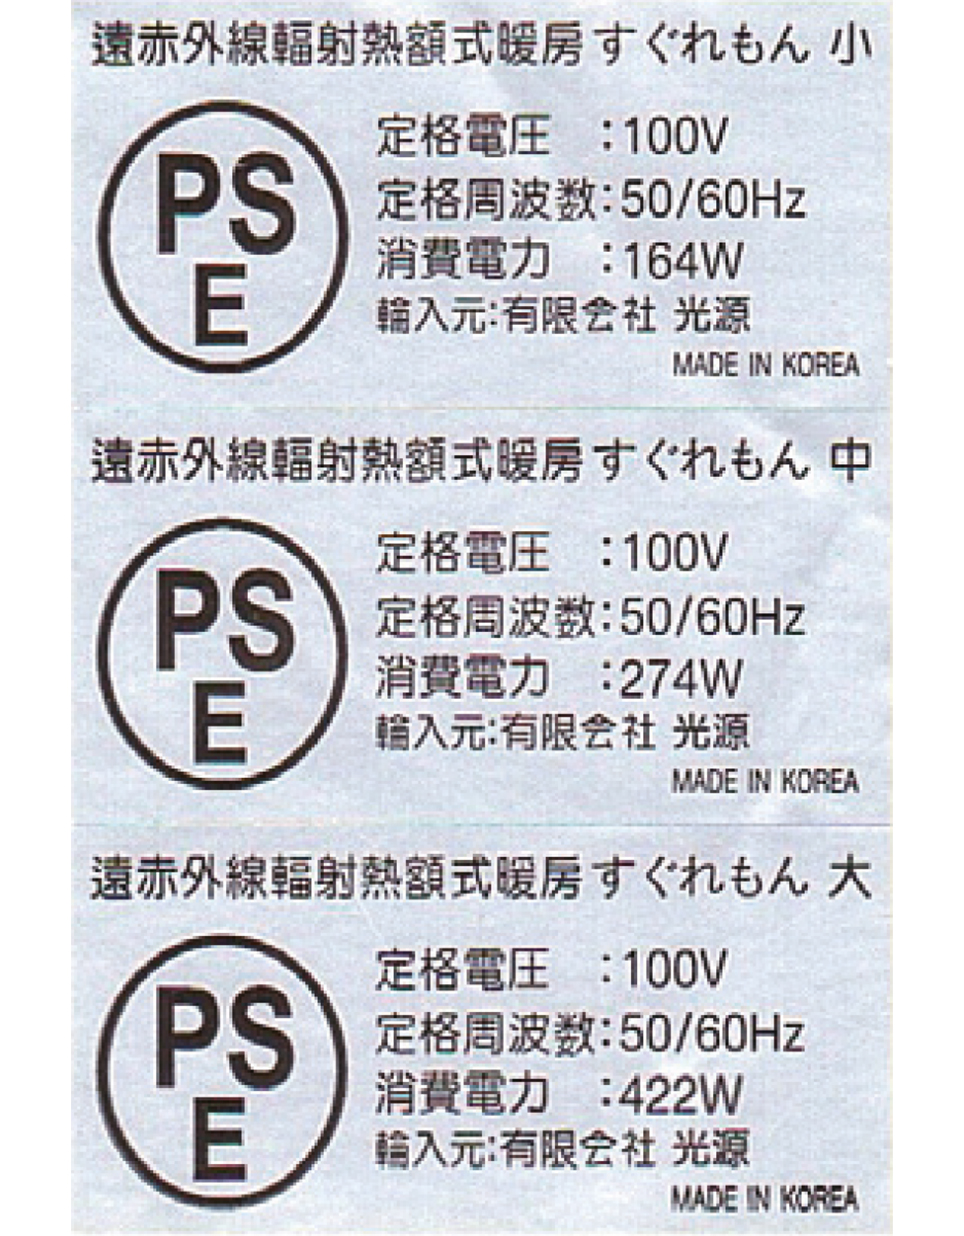 GreenHeating PSE Japan Electric safety certification mark